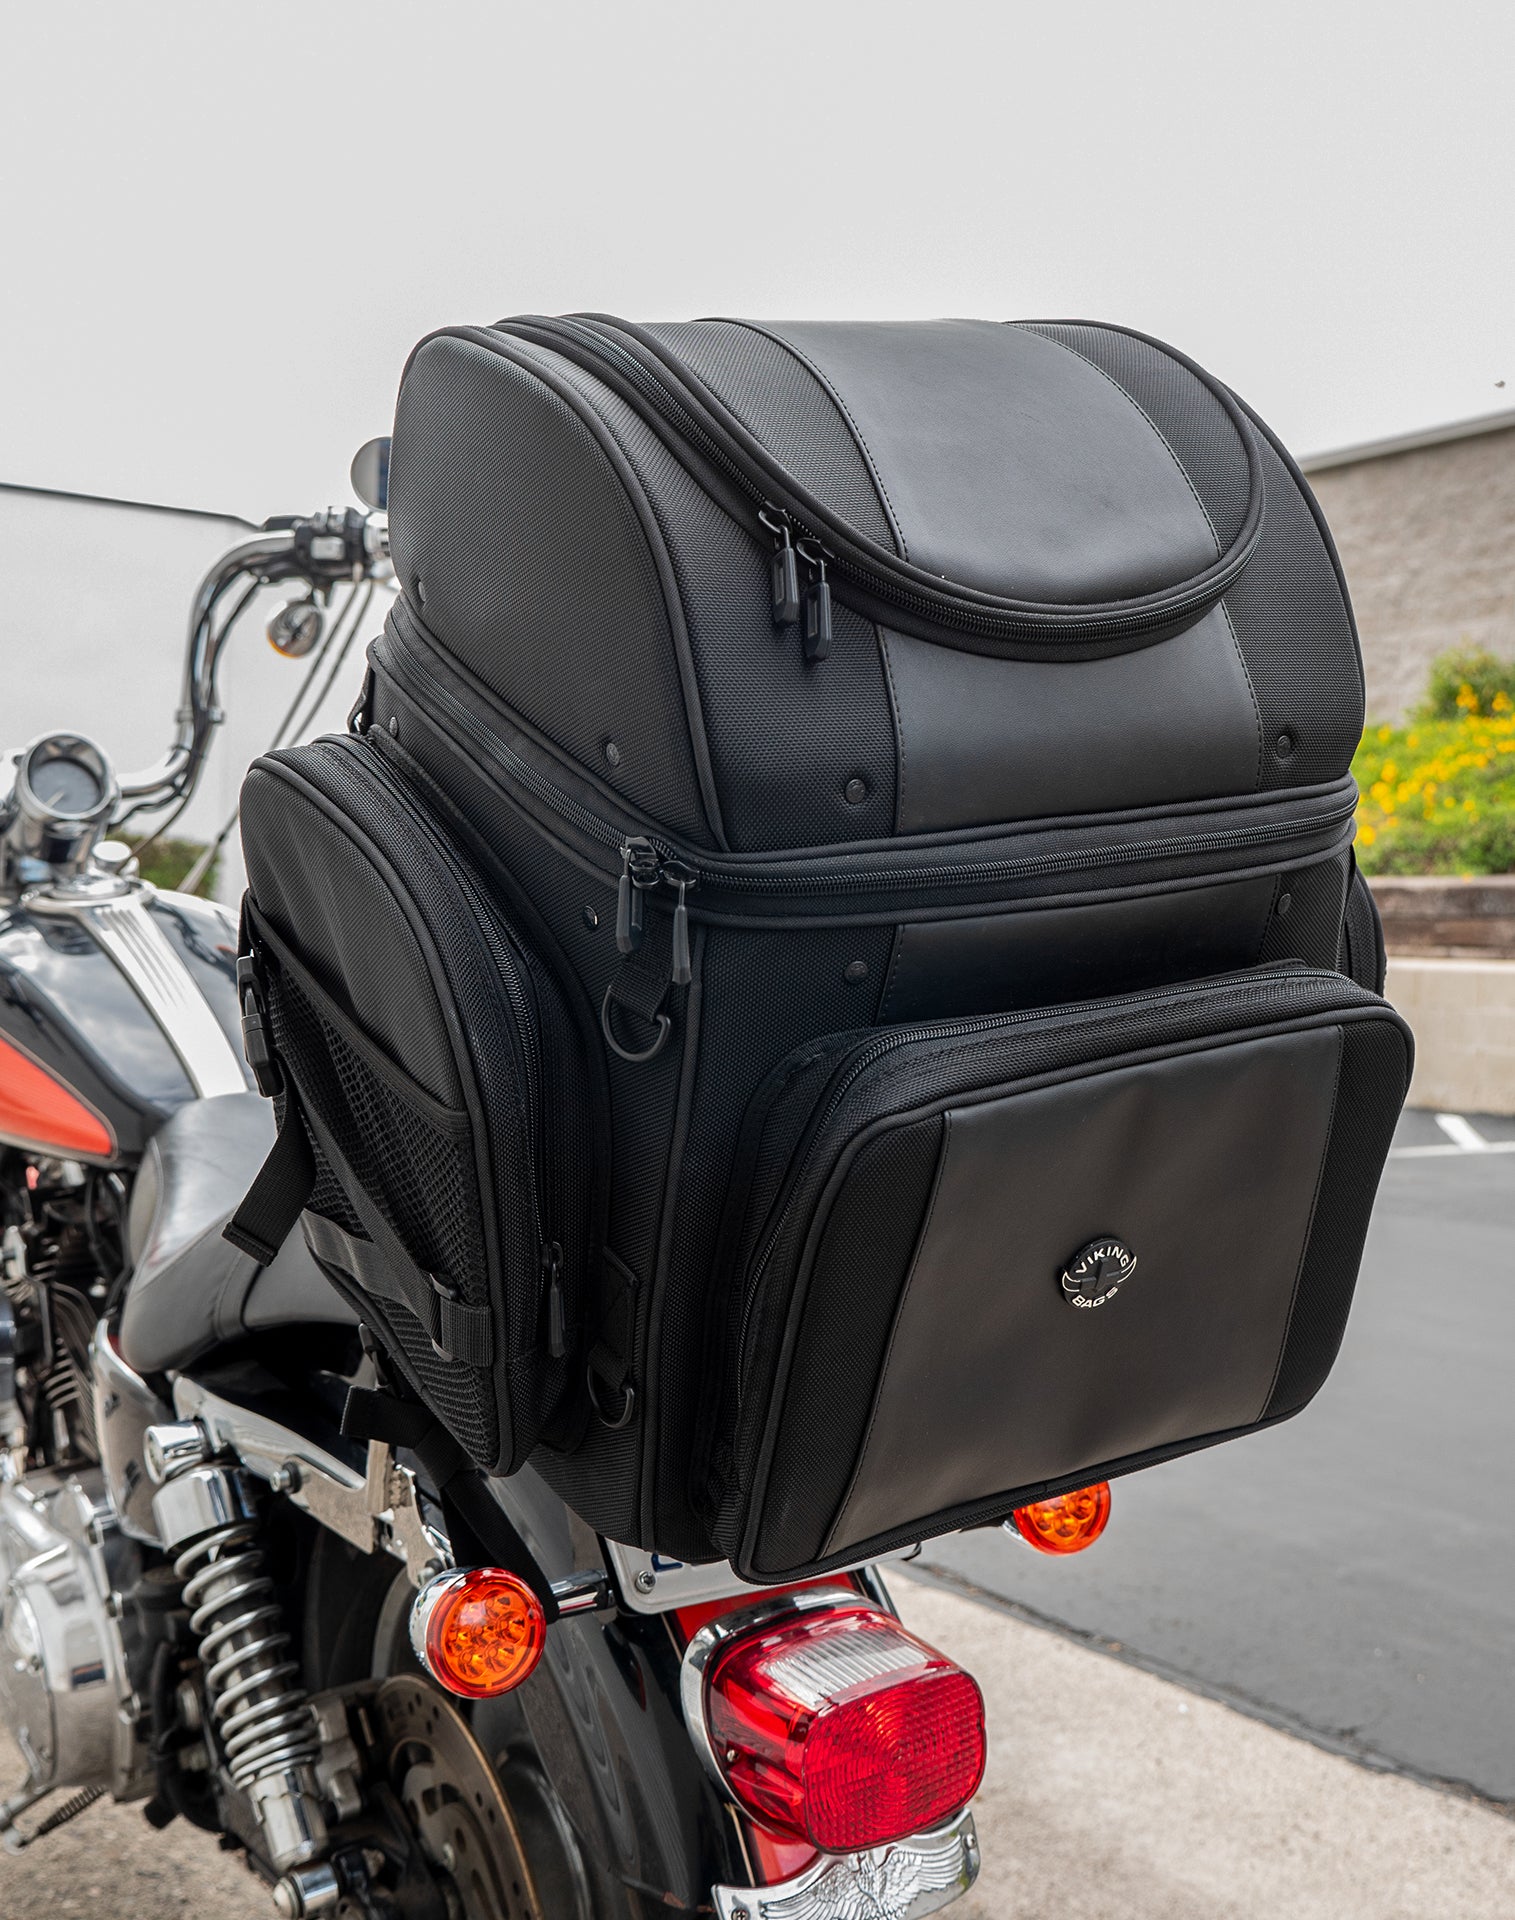 52L - Galleon XL Motorcycle Tail Bag for Harley Davidson